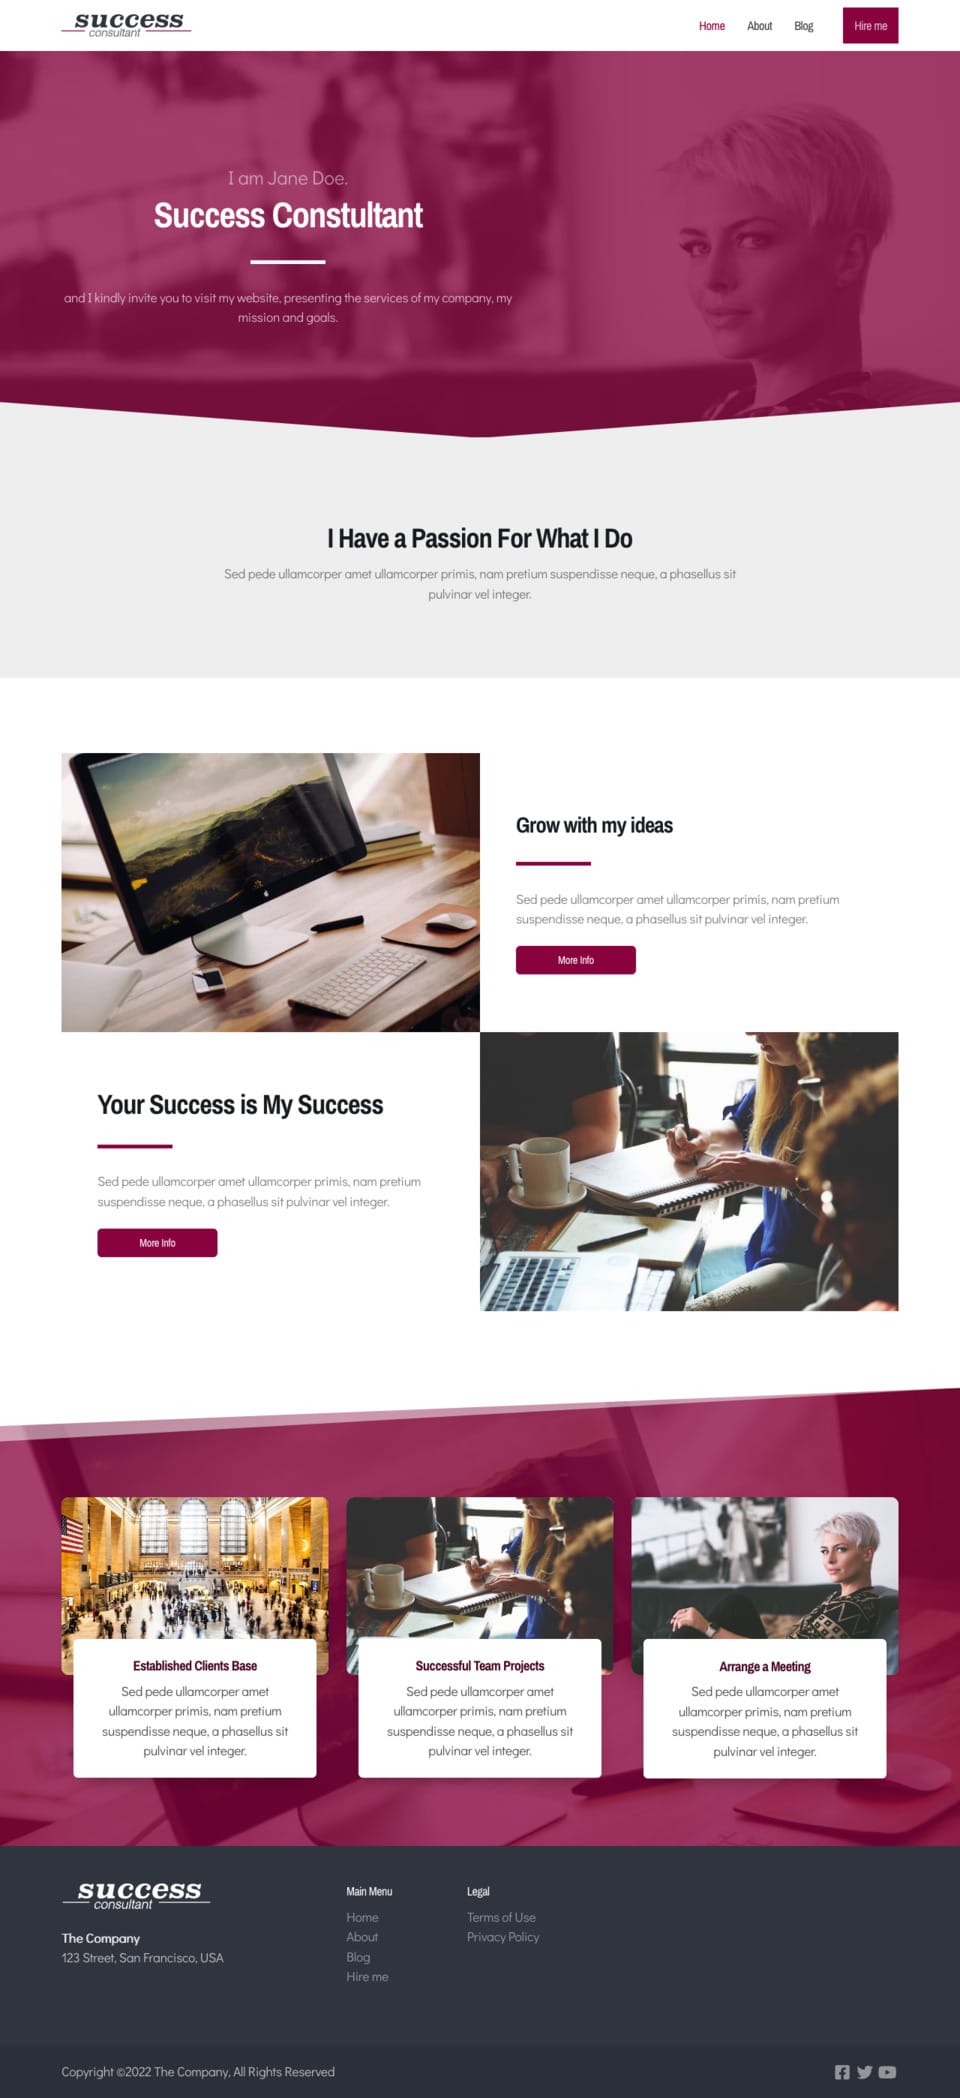 Consultant Website Template - Perfect for consultants, managers, businessmen, insurance professionals, and anyone looking to showcase success and professionalism.